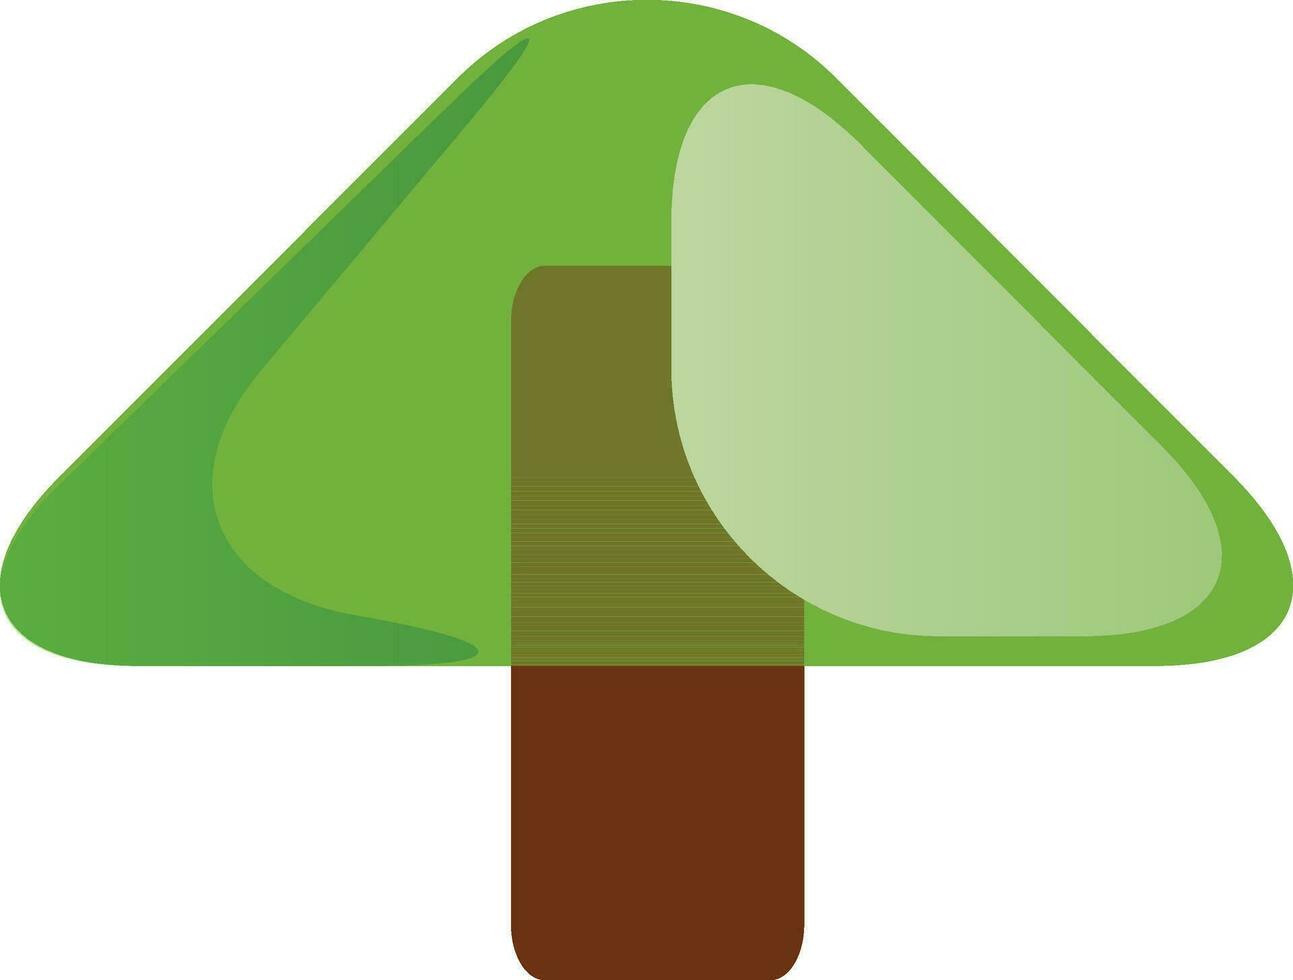 Mushroom icon in green and brown color. vector